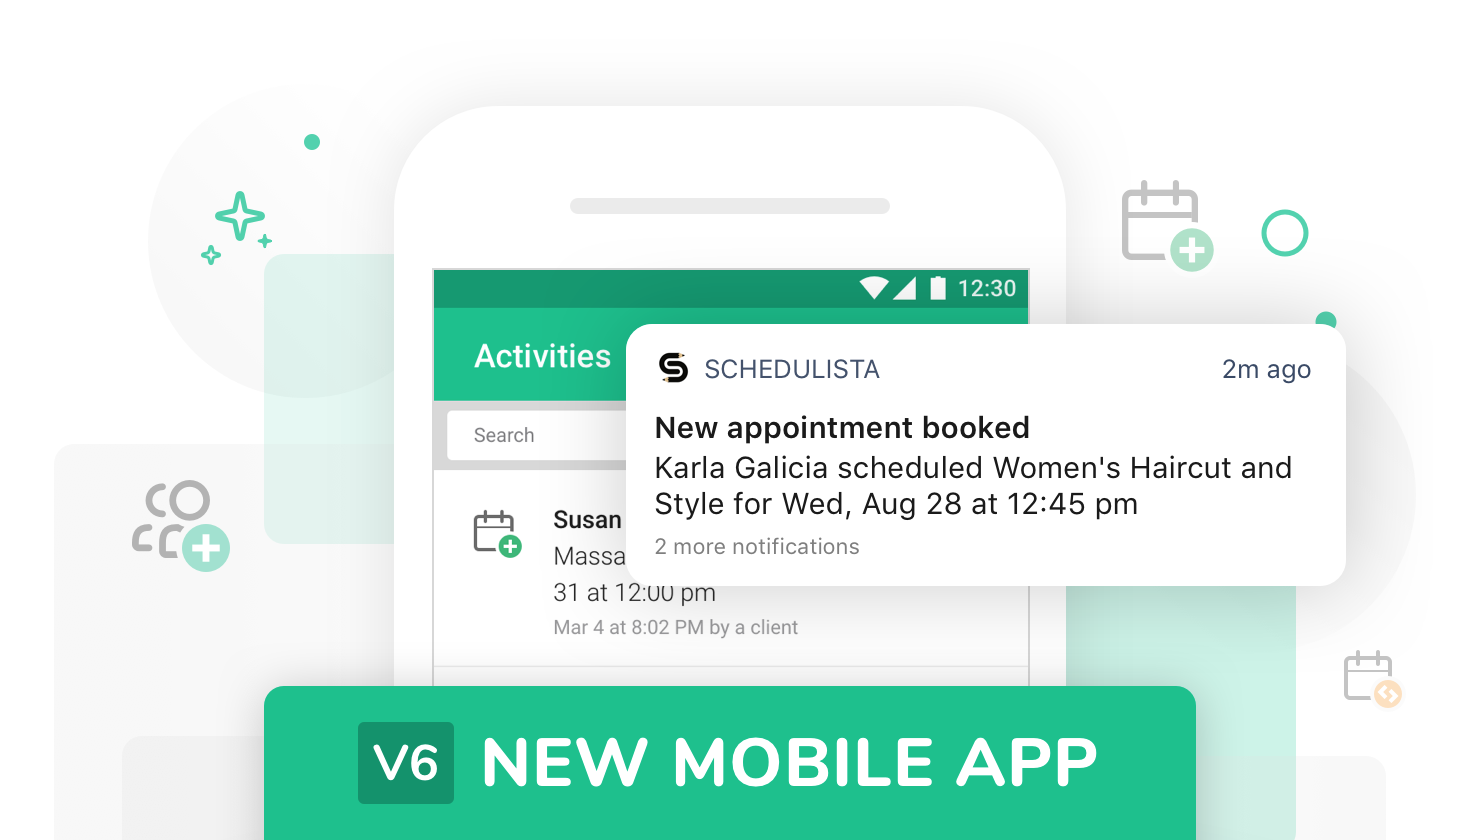 New Schedulista mobile app v6: Push notifications for provider alerts, activities log